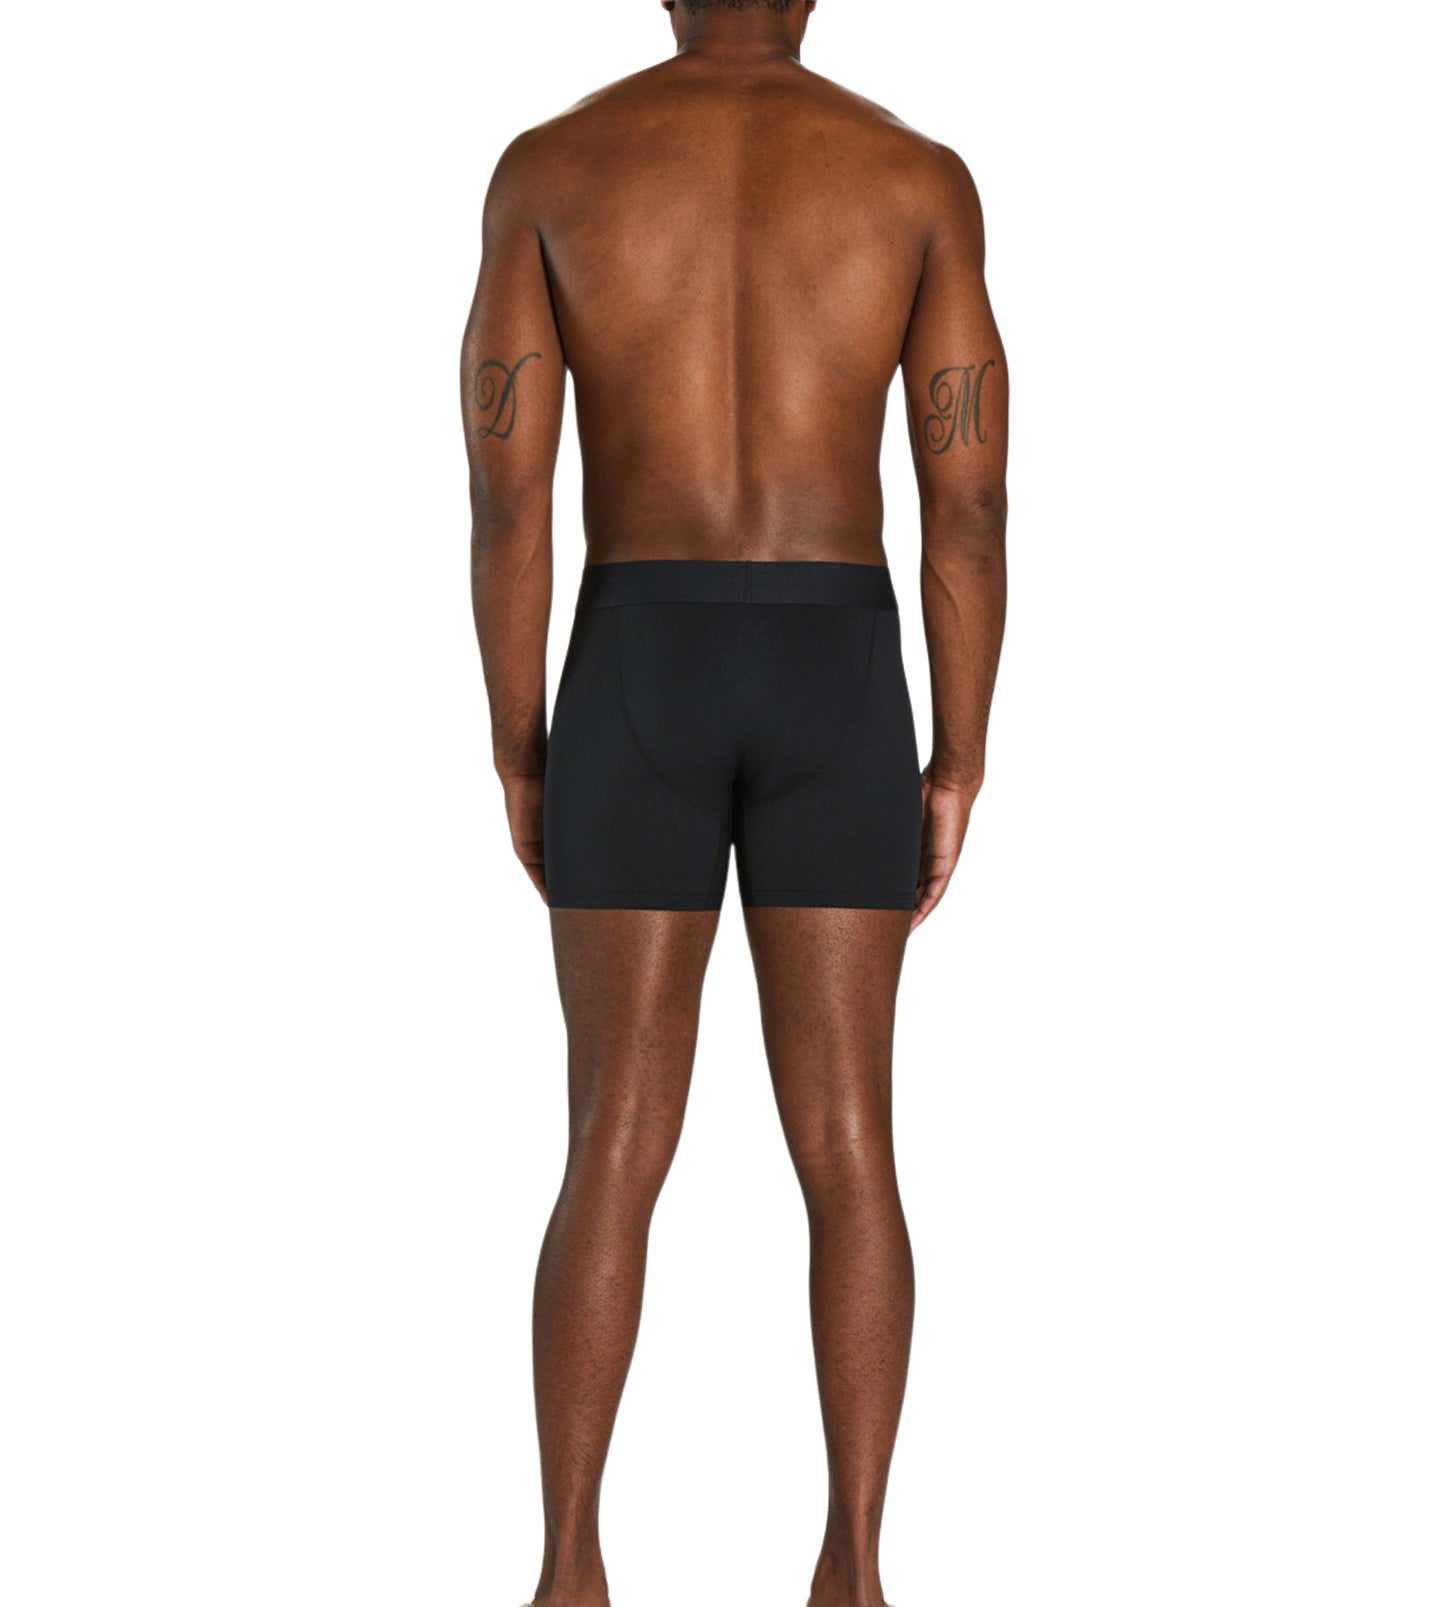 Hustle Boxer Brief 2 Pack colors consists of Saddle brown, Black, Sienna, Light Gray, Saddle brown, Indian red, Dark slate gray, Sienna, Rosy brown